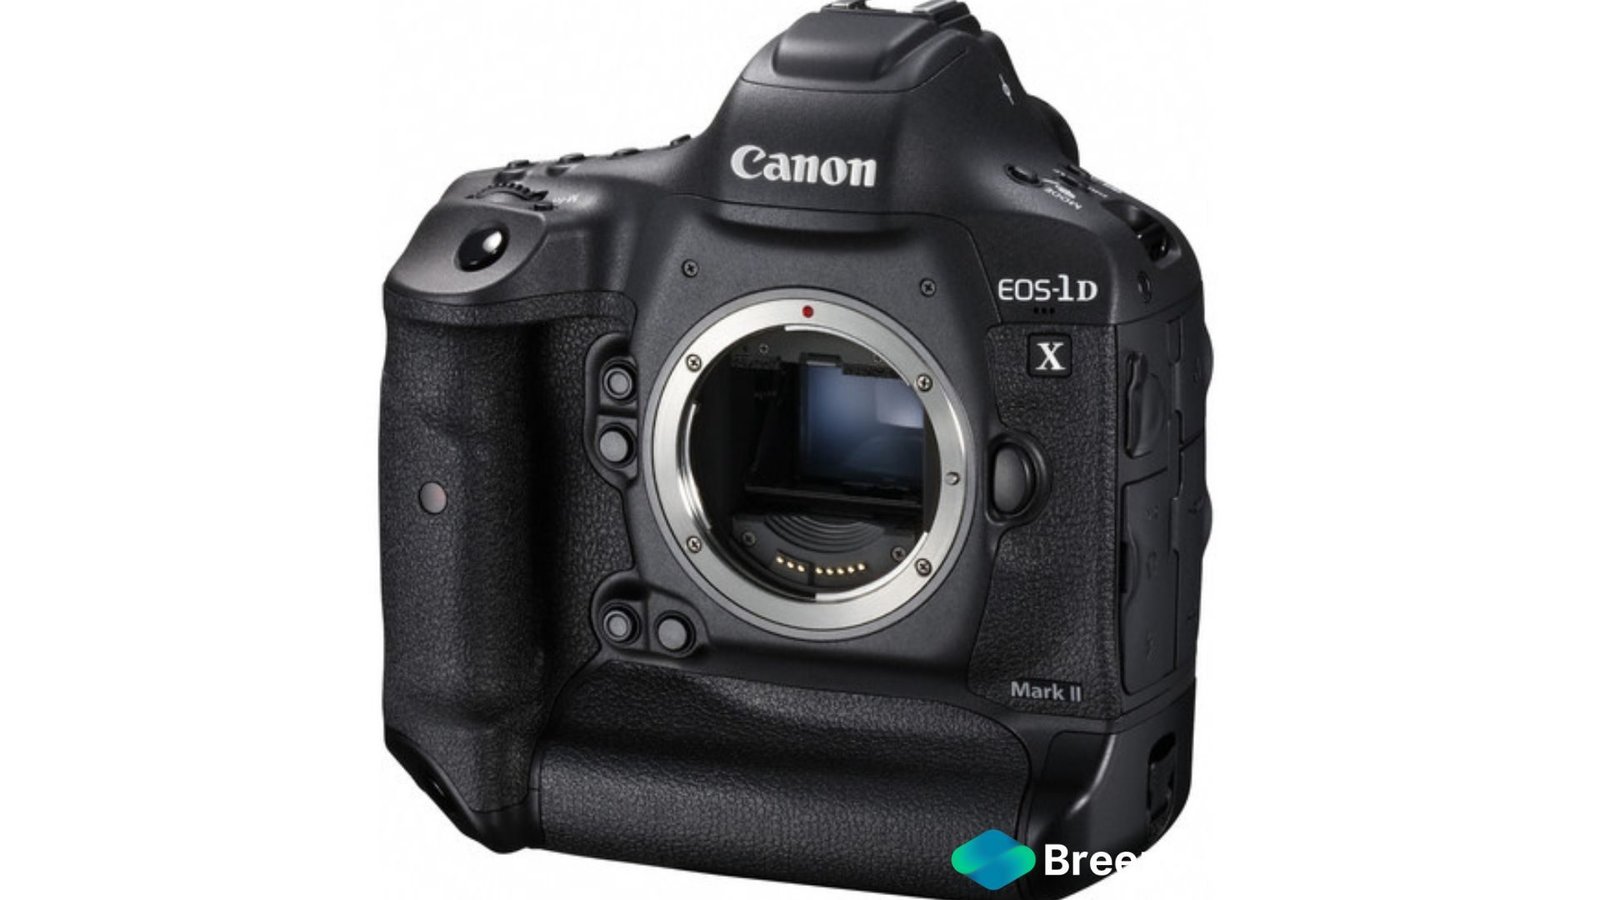 Rent Canon EOS-1D X Mark II Camera Body with Canon lenses Kit in Delhi NCR, Camera accessories, Camera lenses for rent, in Delhi Gurgaon Noida, hire Shooting equipment, Lighting equipment rental, Film gear rental for Video production, camera rental company in Delhi, film equipment rental company